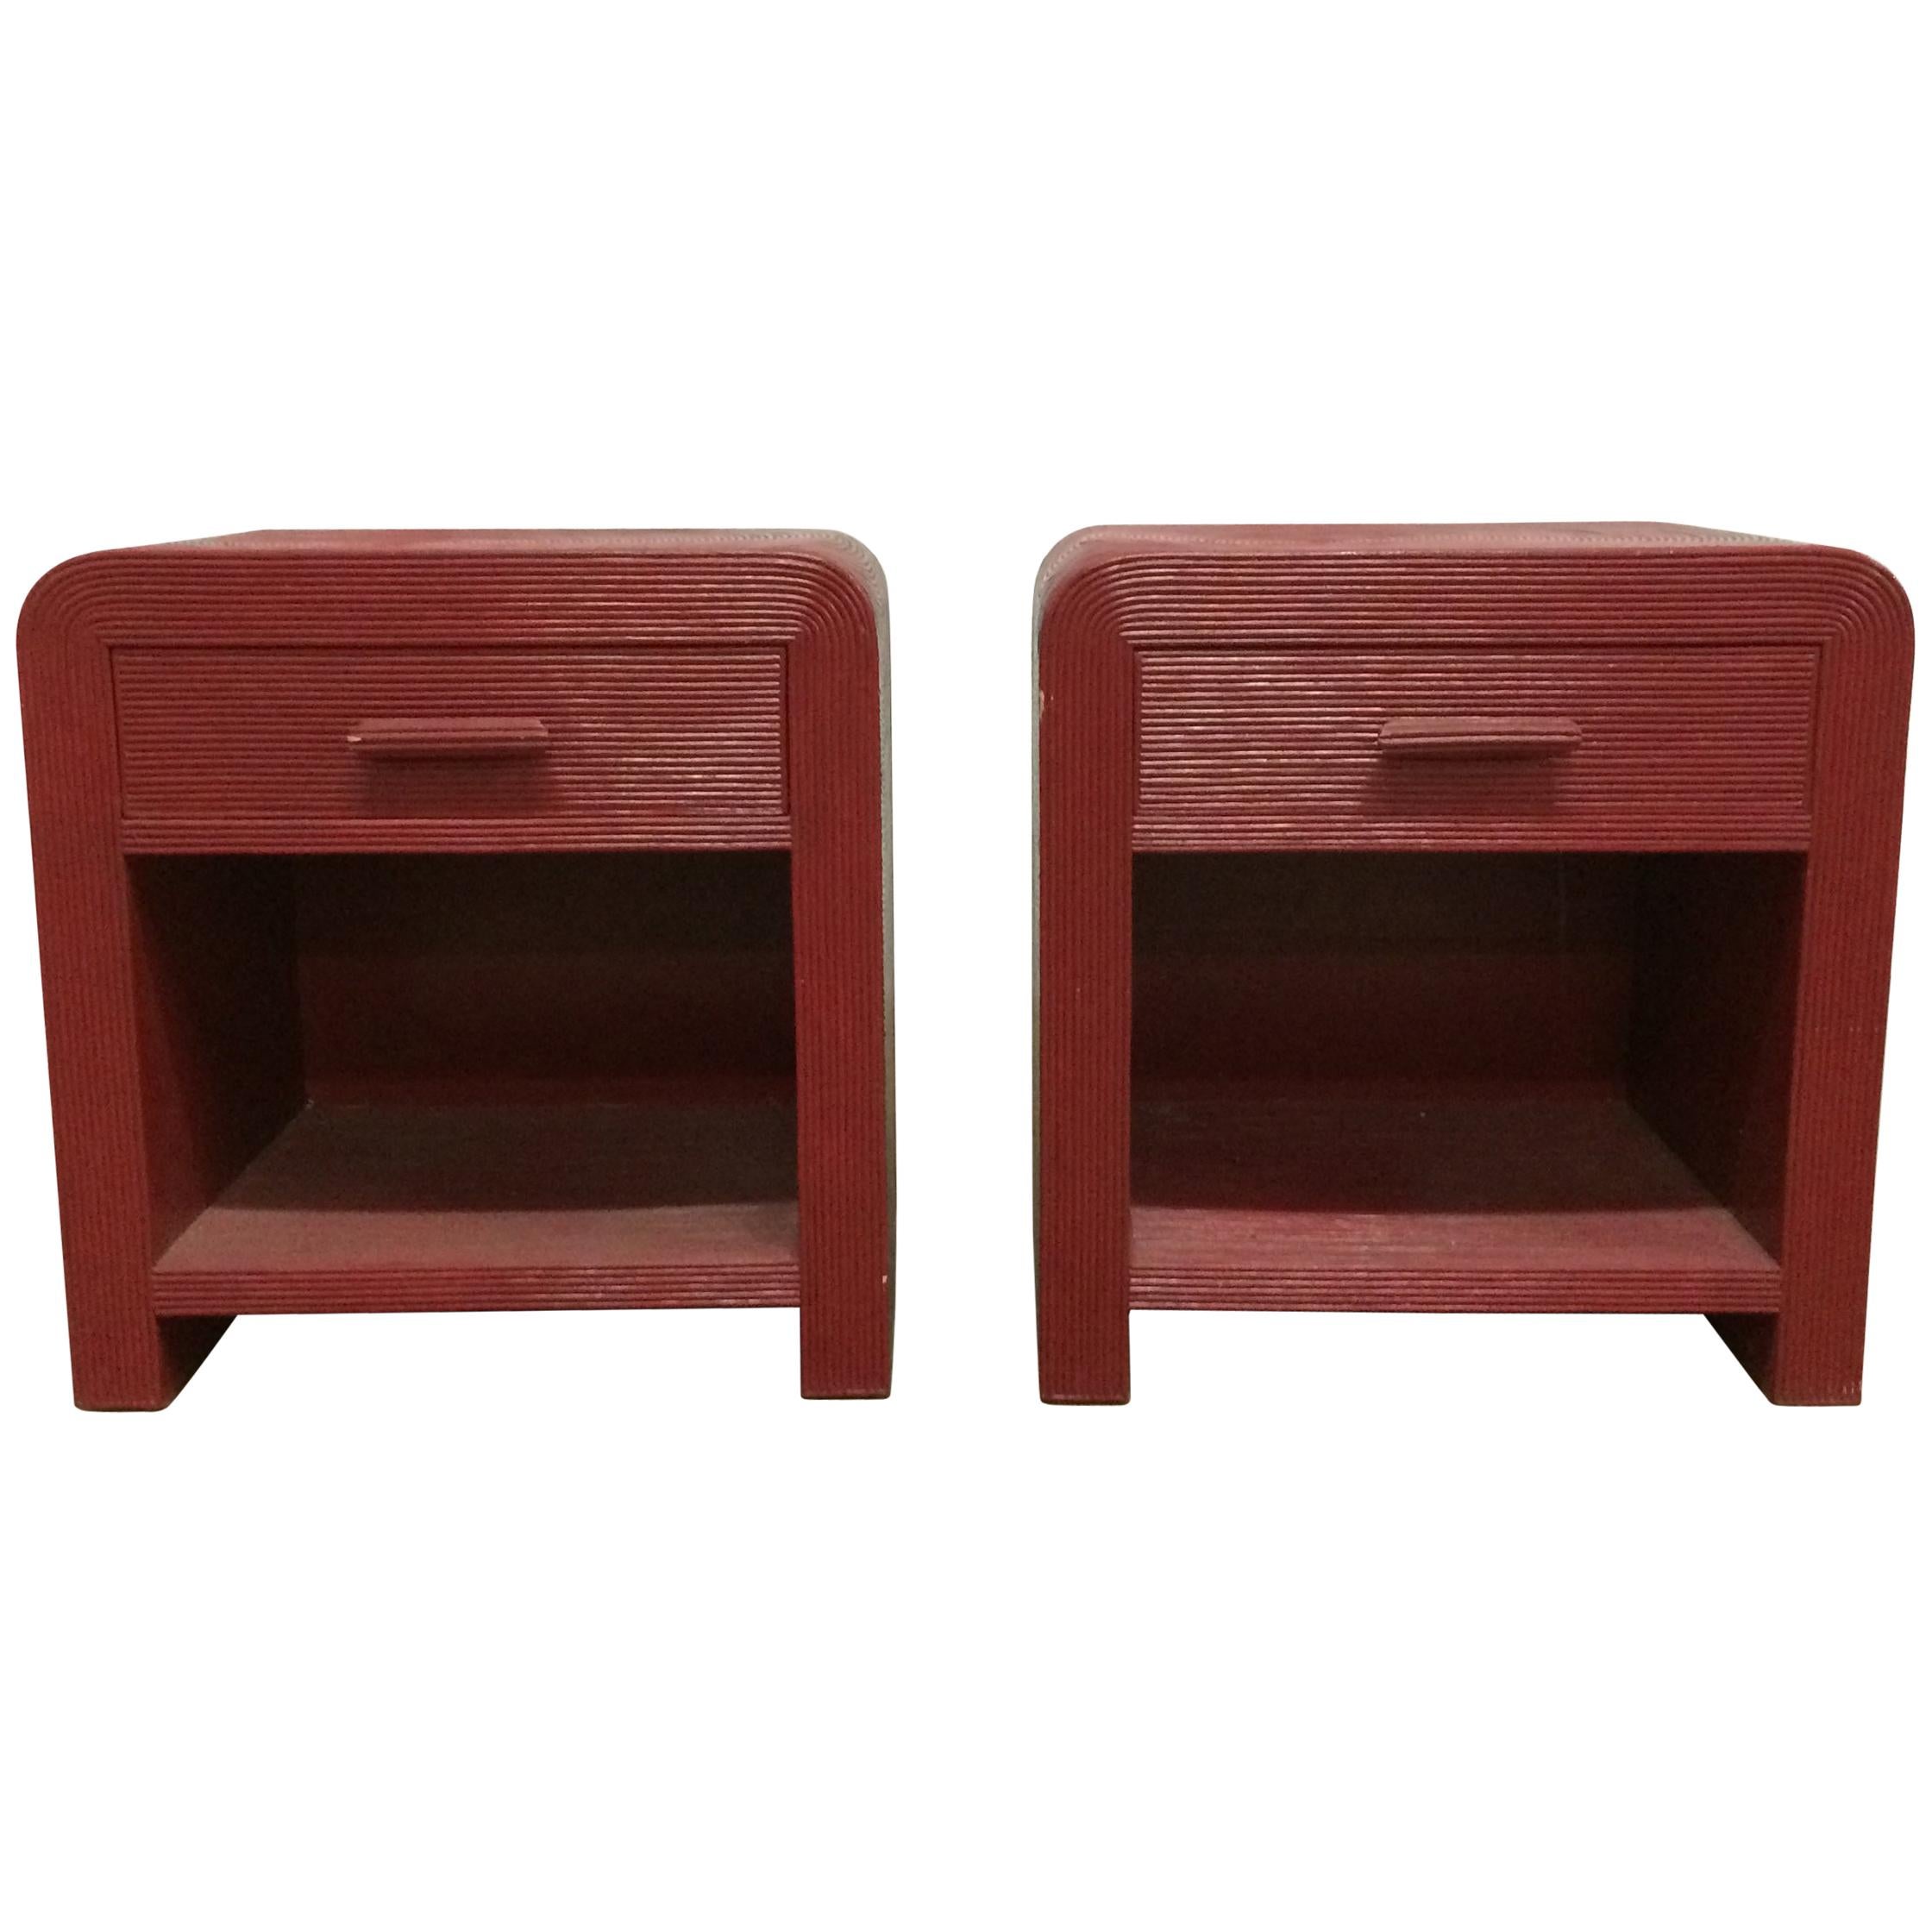 Pair of Pencil Reed Night Stands or End Tables 1980s